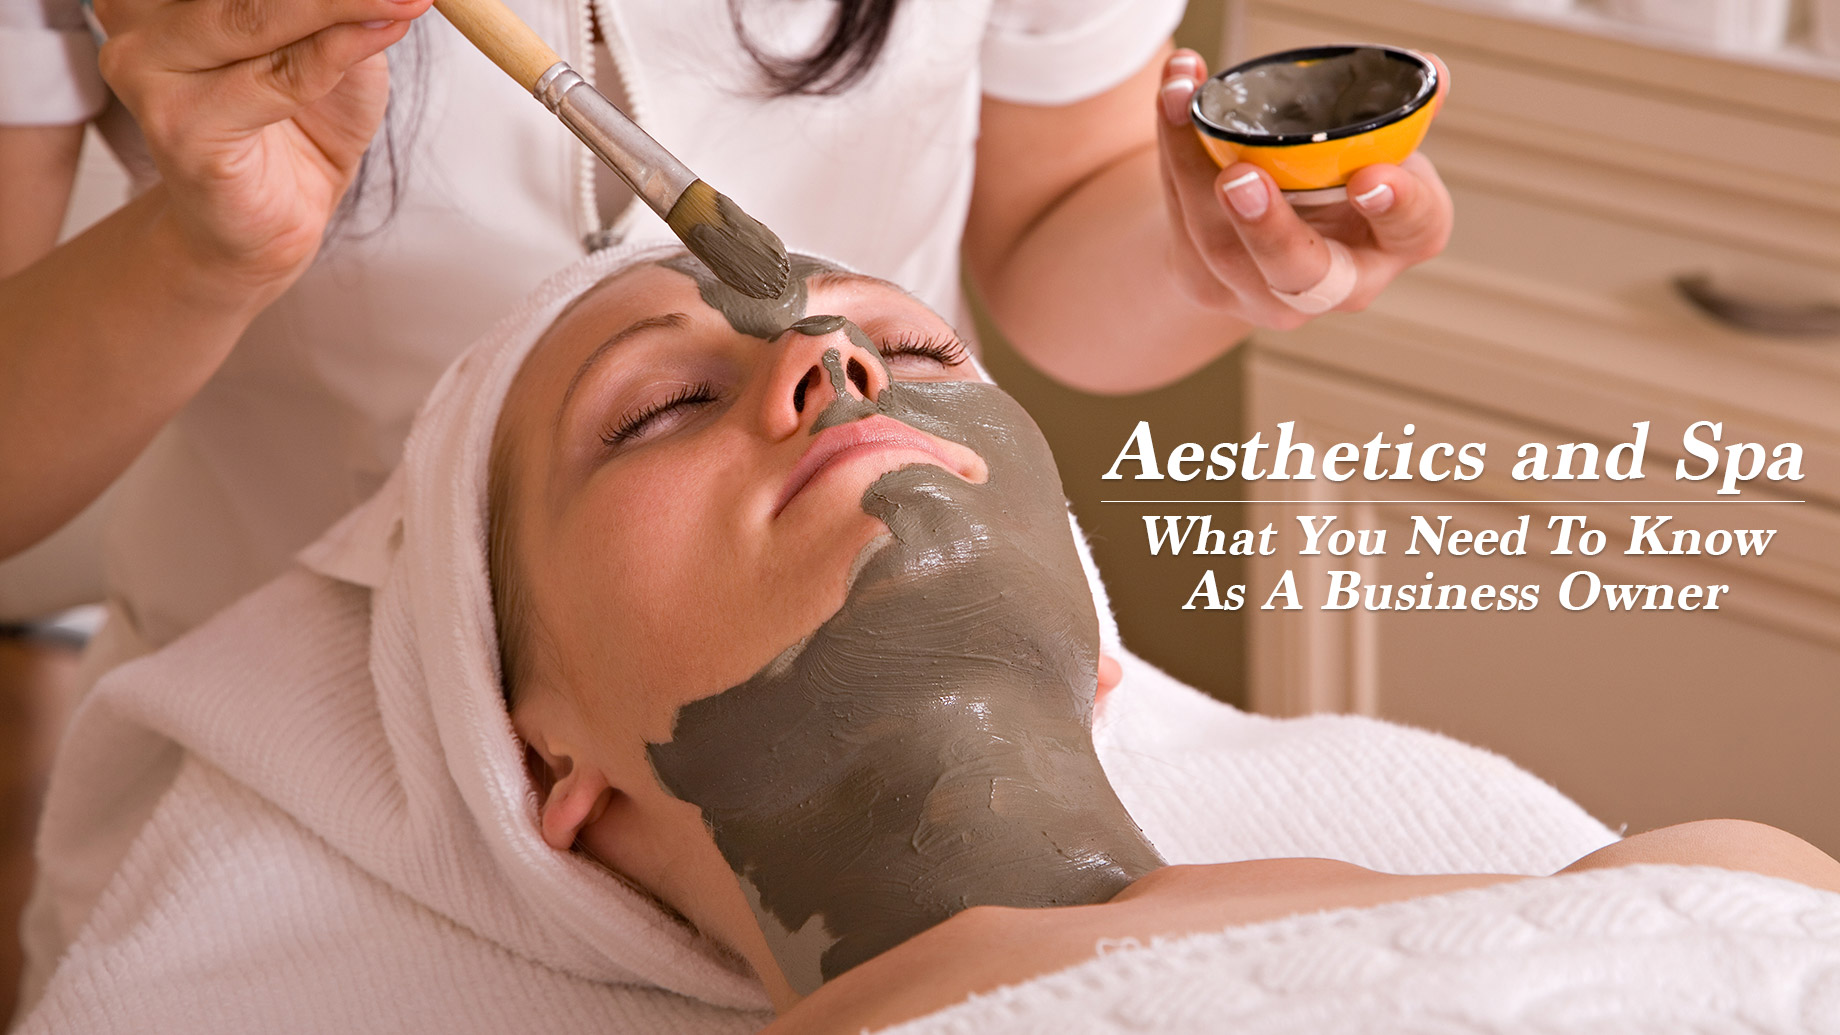 Aesthetics and Spa - What You Need To Know As A Business Owner